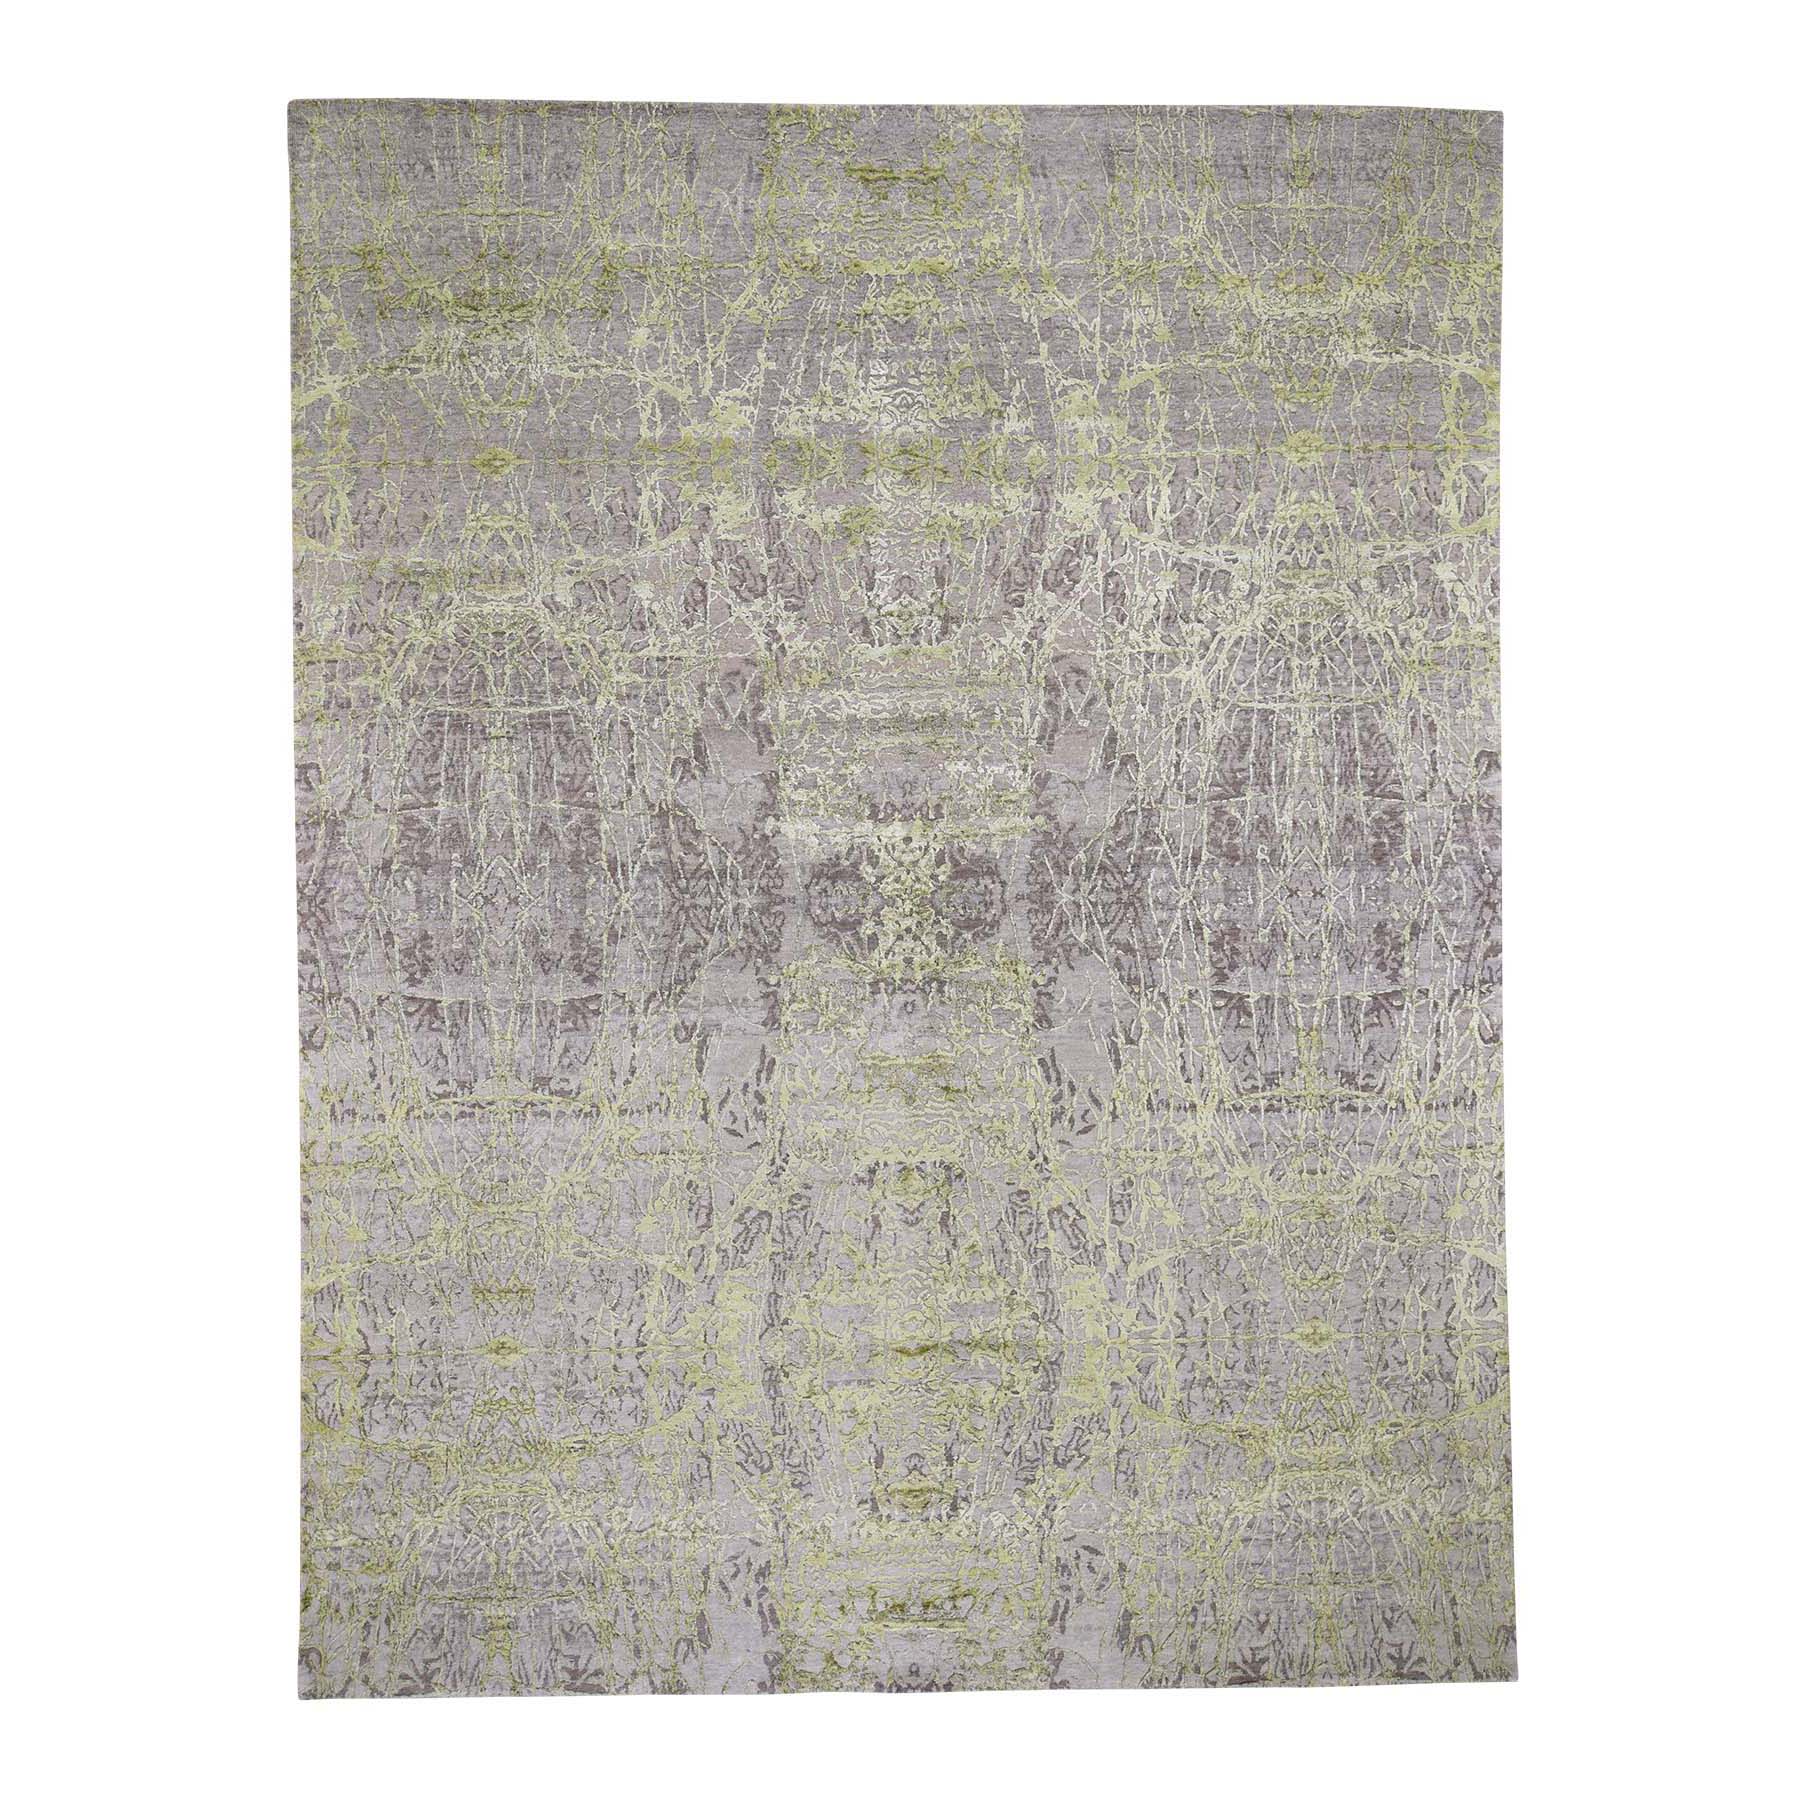 9'x11'9" Light Green Tone On Tone Wool And Silk Abstract Design Hand Woven Oriental Rug 